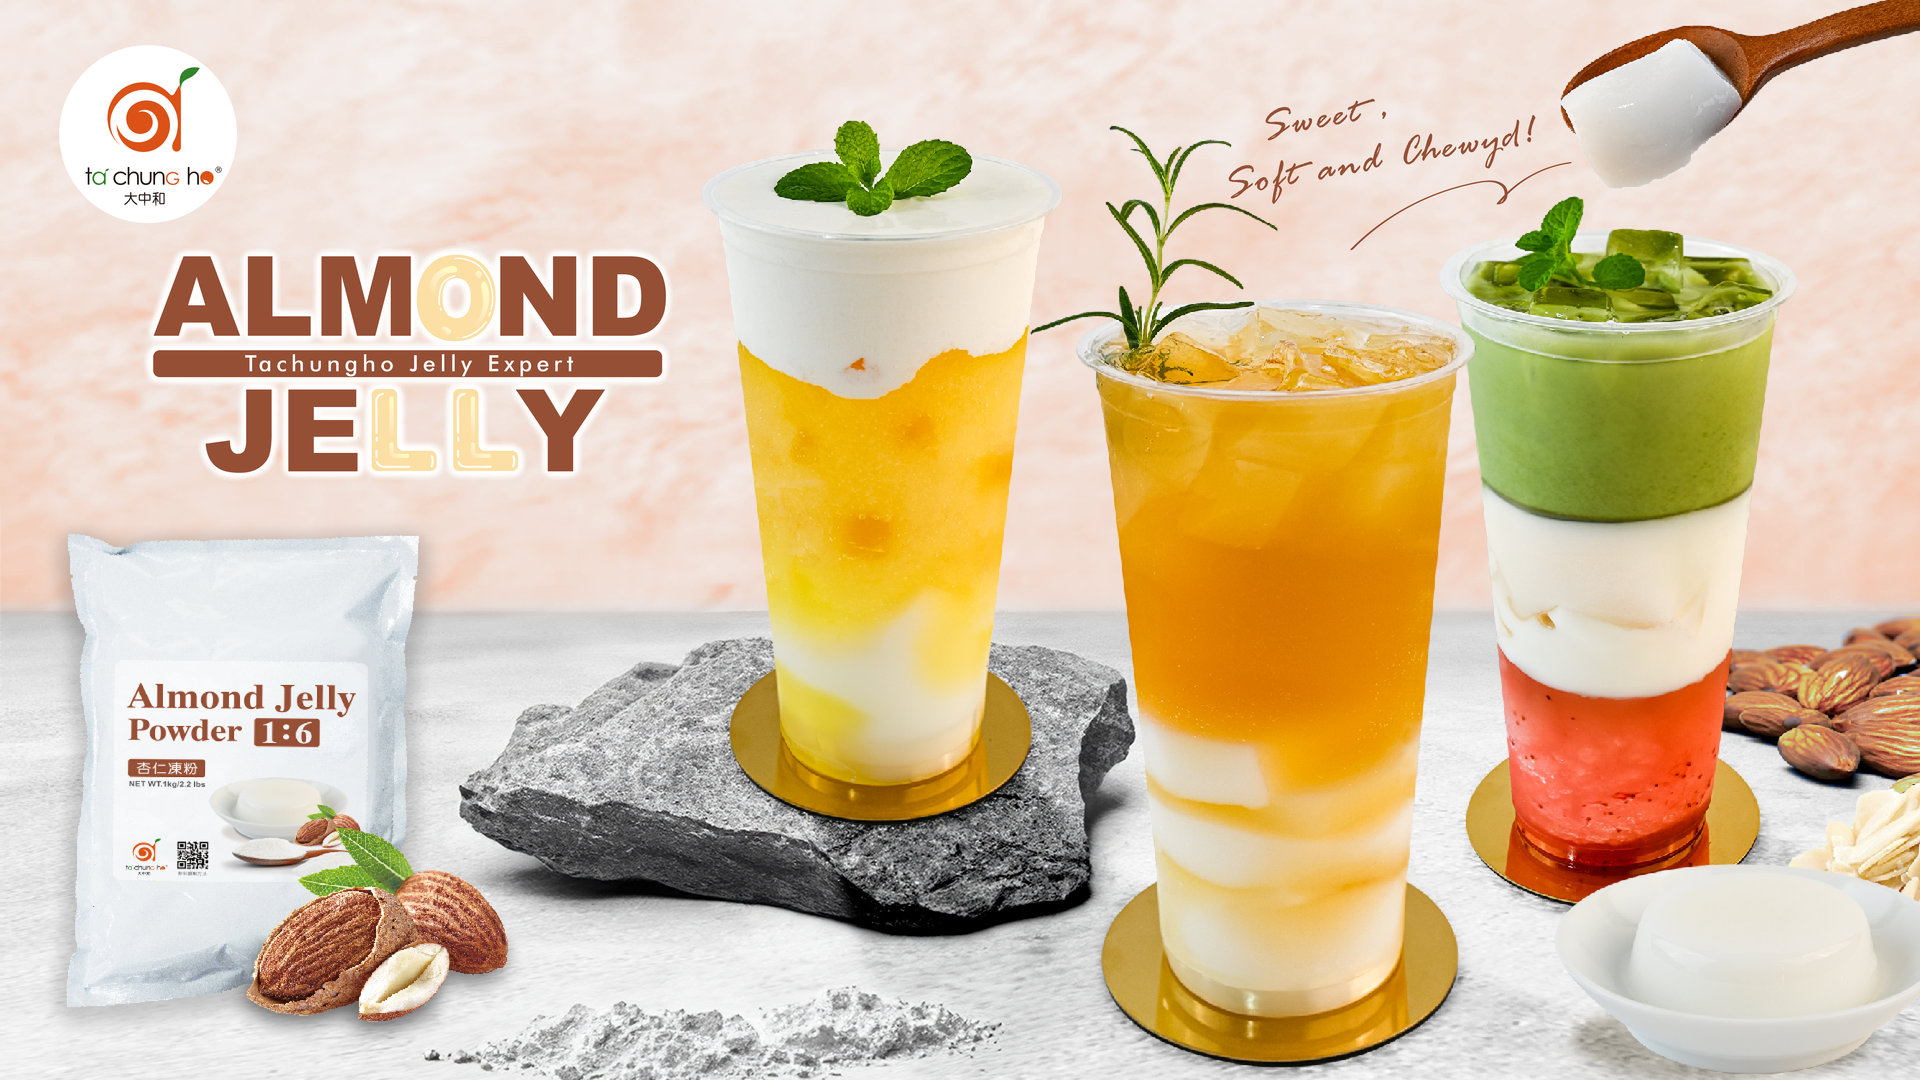 【New Product launch】Almond Jelly